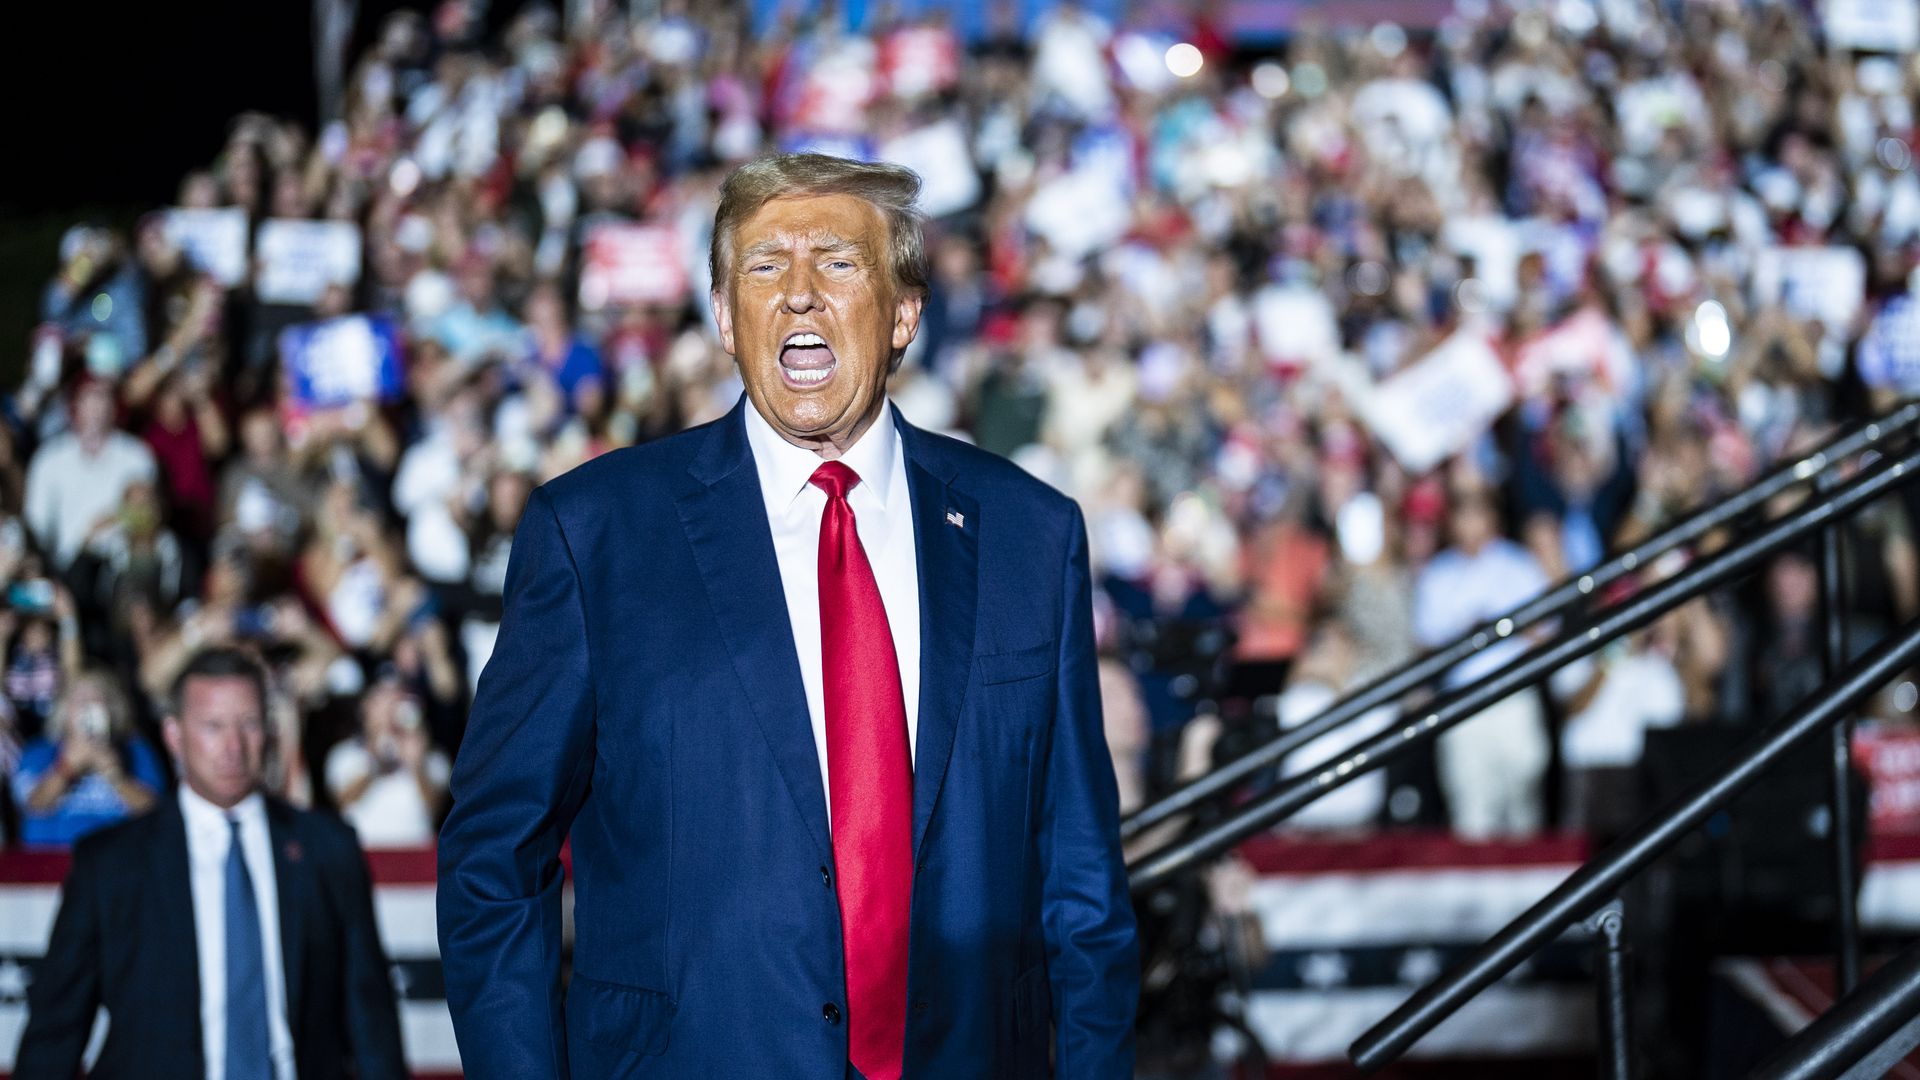 Former President Trump is shown in a blue suit, white shirt and red tie, standing in front of a crowd at a rally.